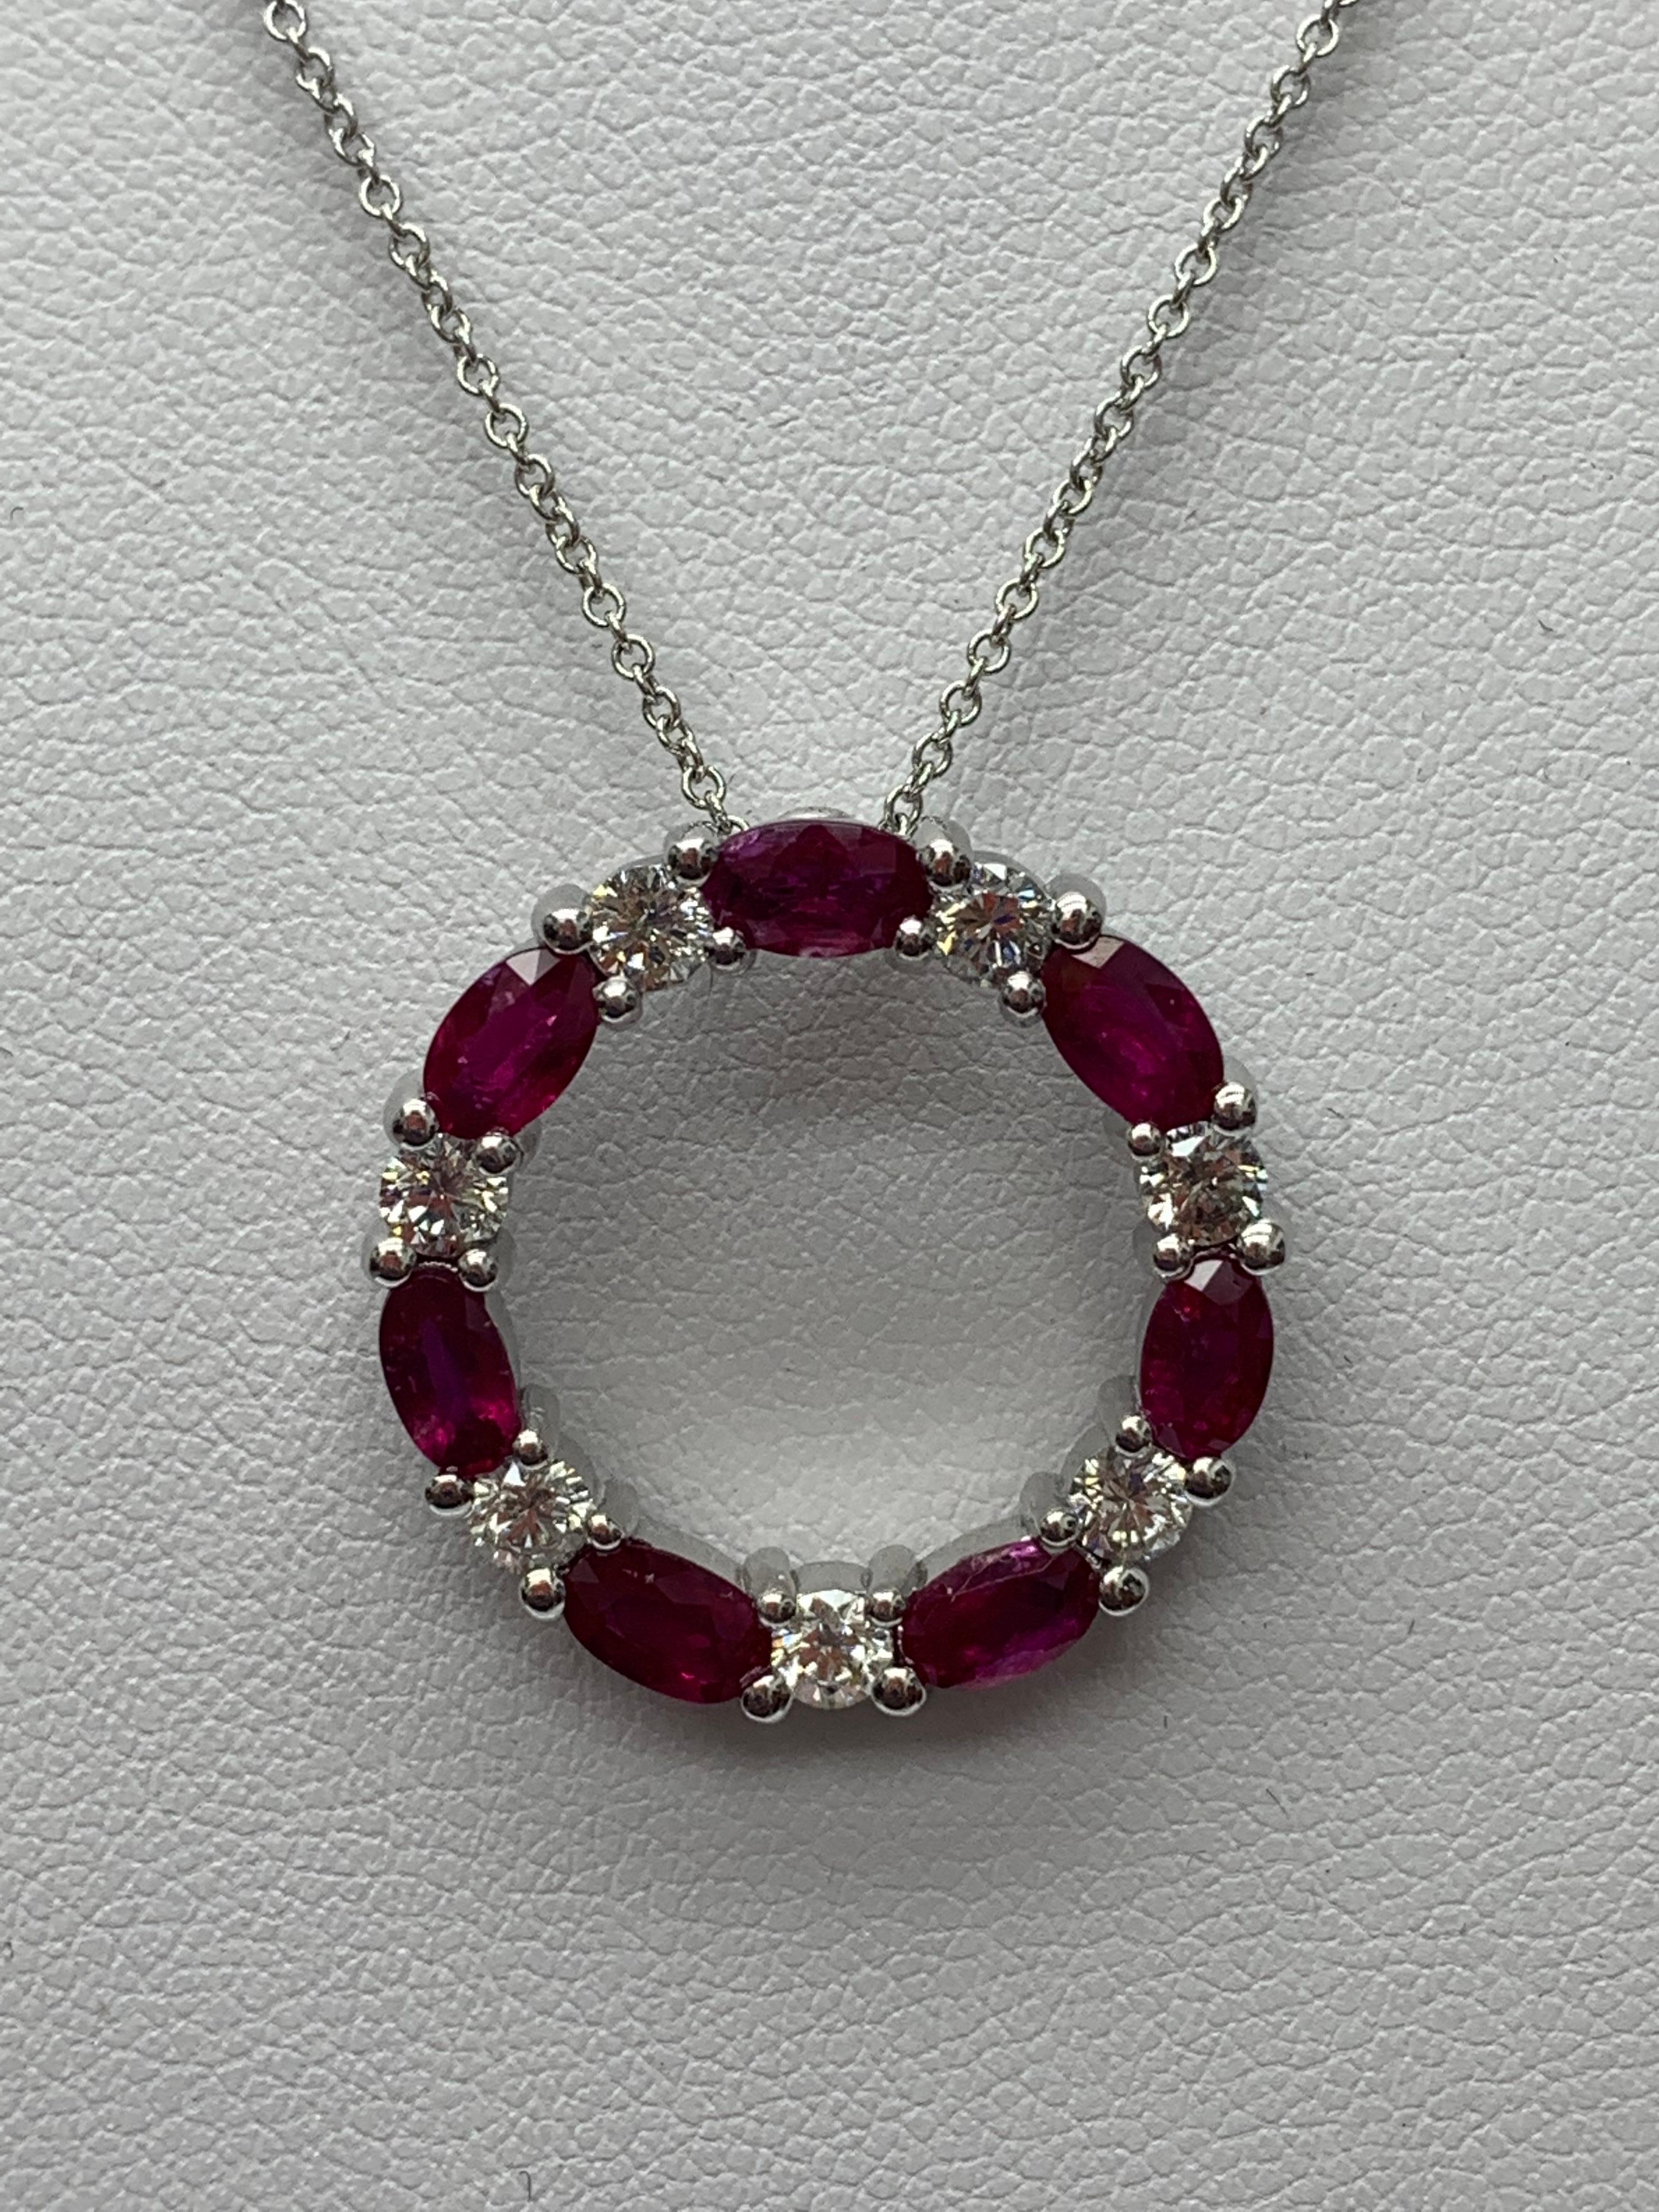 A stylish pendant necklace showcasing a row of rubies alternating diamonds, set in an open-work, circular design. 7 oval shape rubies weigh 1.99 carats and 7 brilliant-cut diamonds weigh 0.71 carats in total. All diamonds are GH color SI1 Clarity.